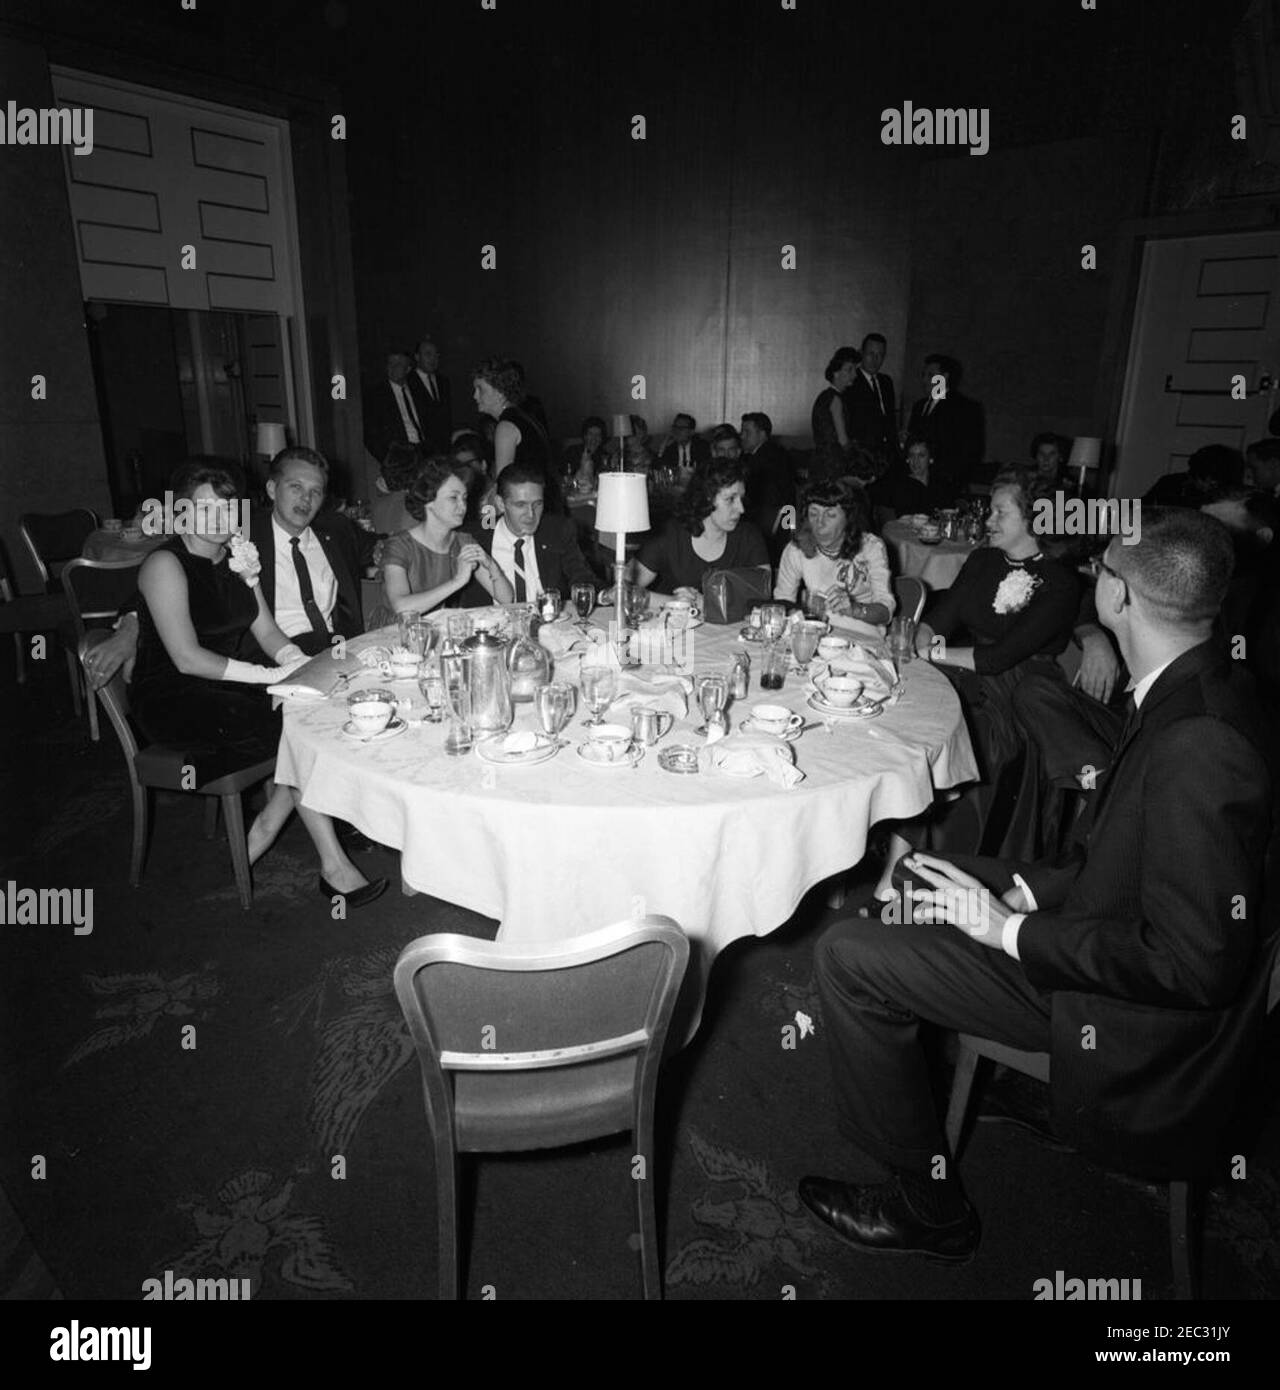 White House Communications Agency (WHCA) staff dinner party. Guests attend a dinner for White House Communications Agency (WHCA) staff. Persons in foreground are unidentified; WHCA officers Joe Taylor and Daniel S. Antinozzi stand in background. Unidentified location, Washington, D.C. [Photograph by Dan Lewis] Stock Photo